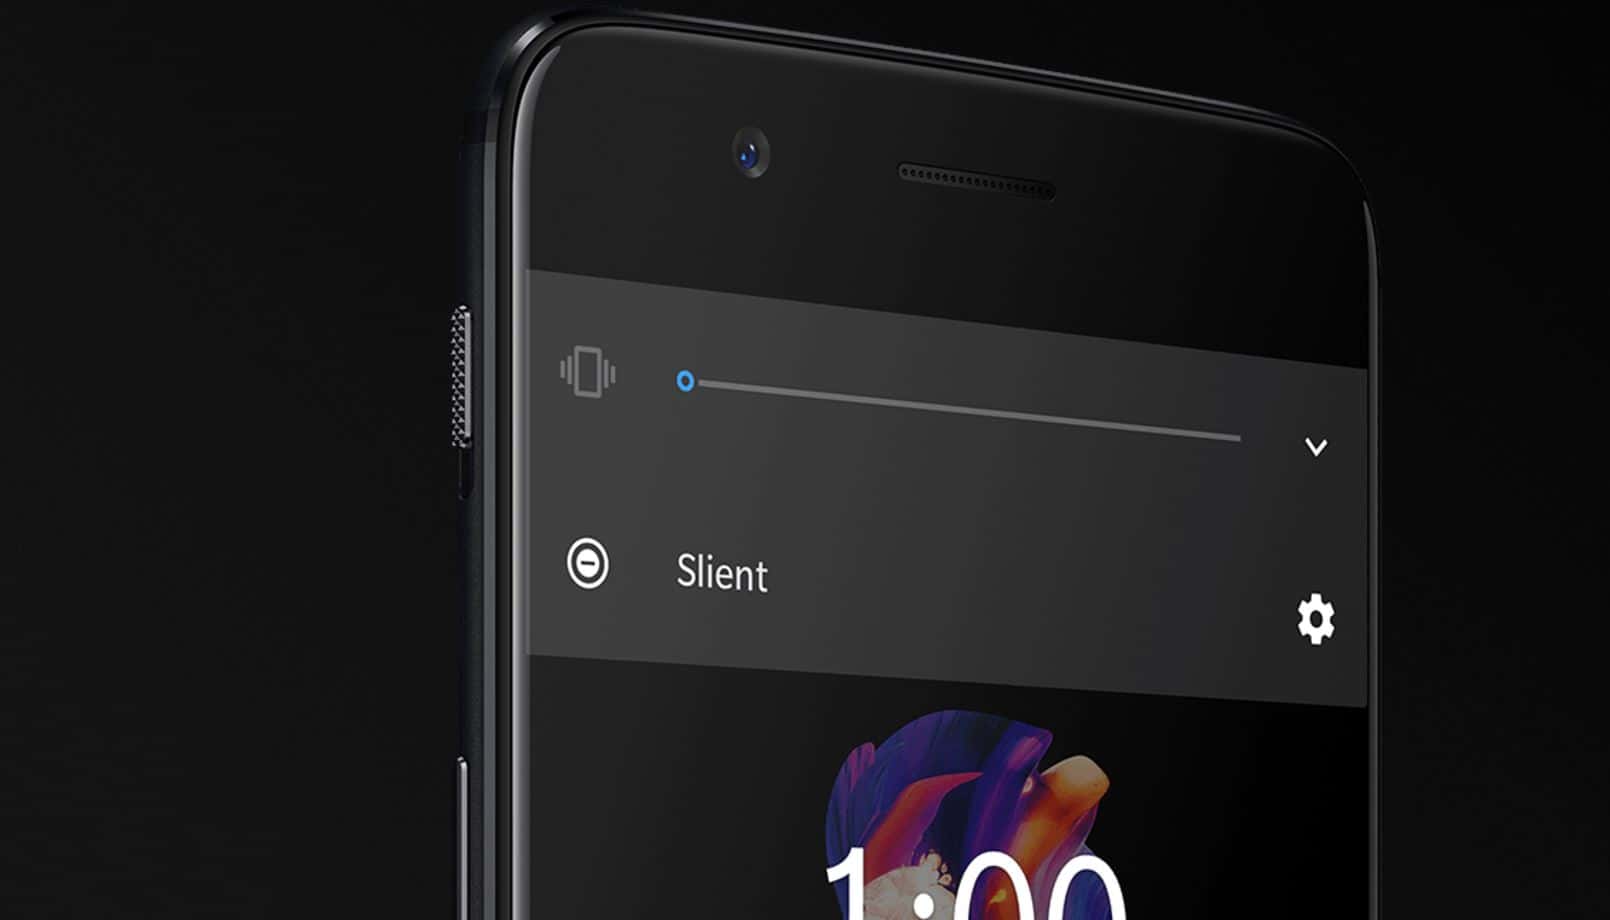 The OnePlus 5 certainly possesses many features that set it apart from its competitors, and the alert slider is certainly one of the many